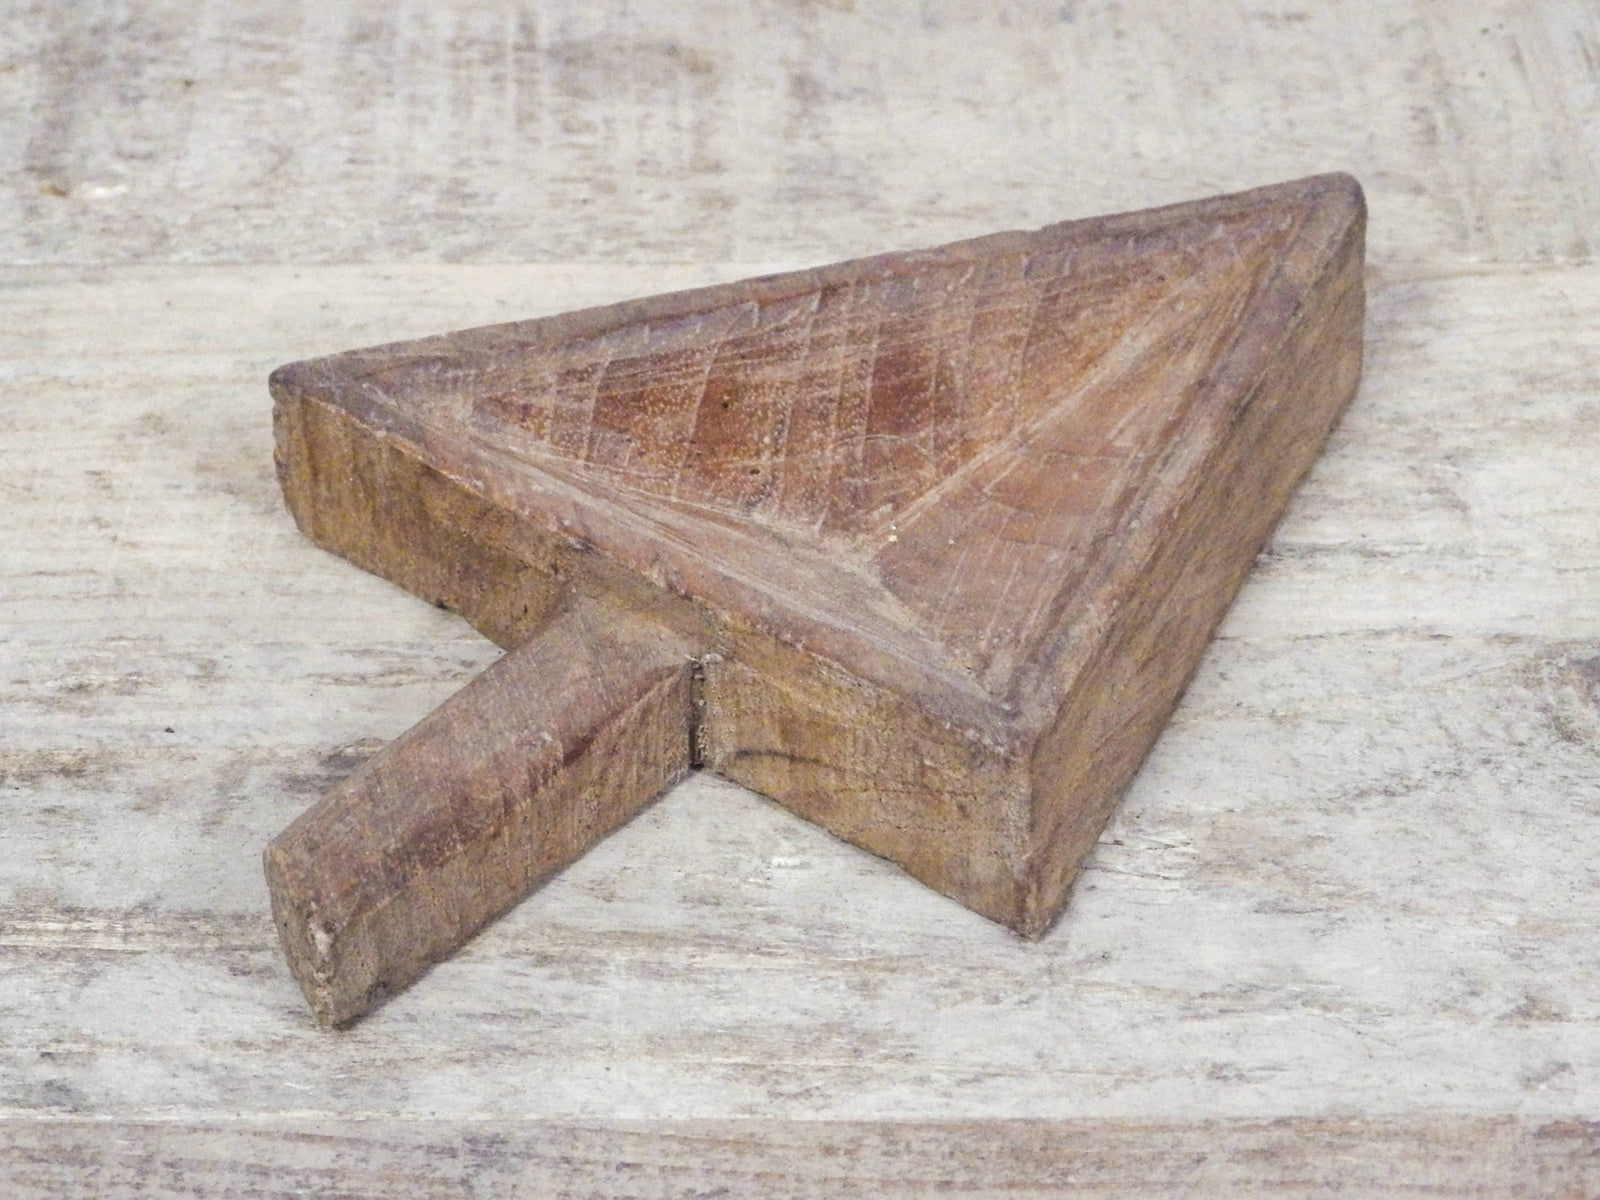 MILL-1360 Carved Wooden Scoop